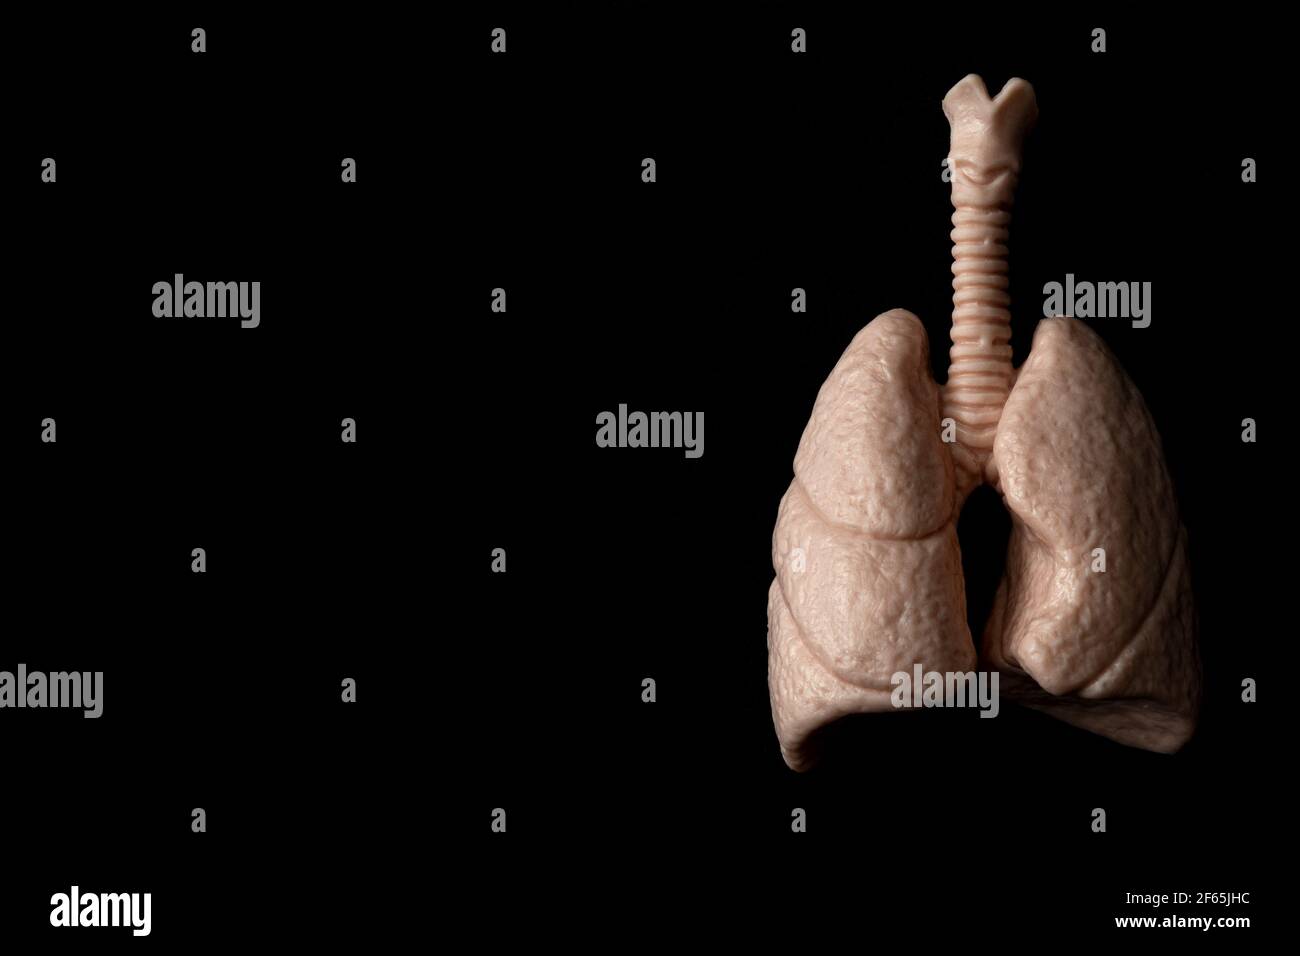 Human organs, respiratory system and breathing concept theme with anatomical lungs isolated on black background with high  contrast lighting, moody li Stock Photo